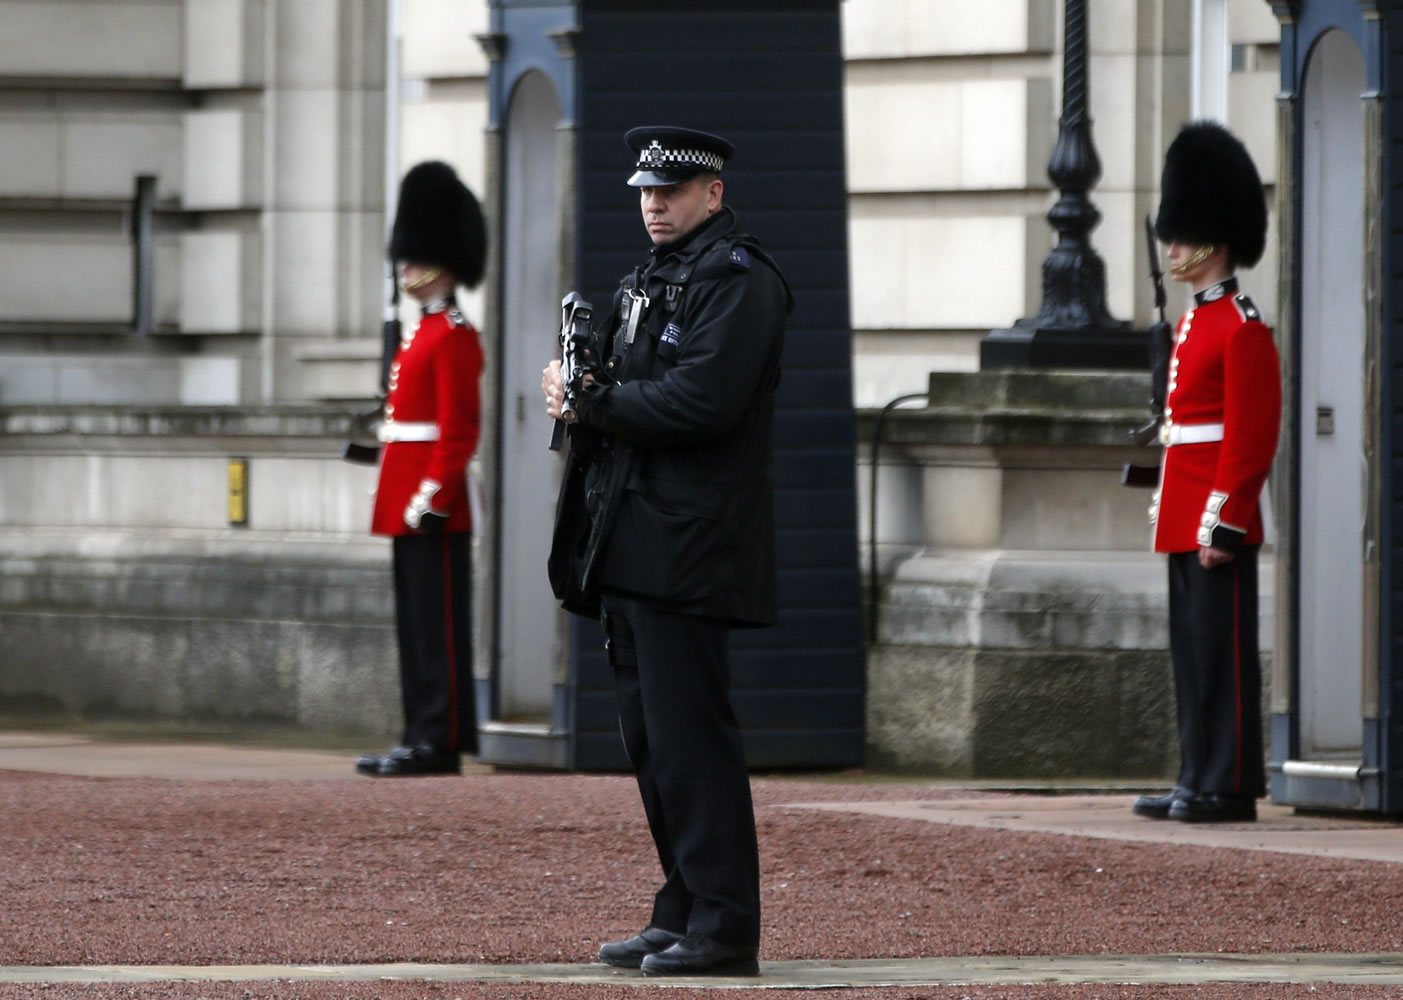 A British police officer guards the grounds of Buckingham Palace in central London on Monday.